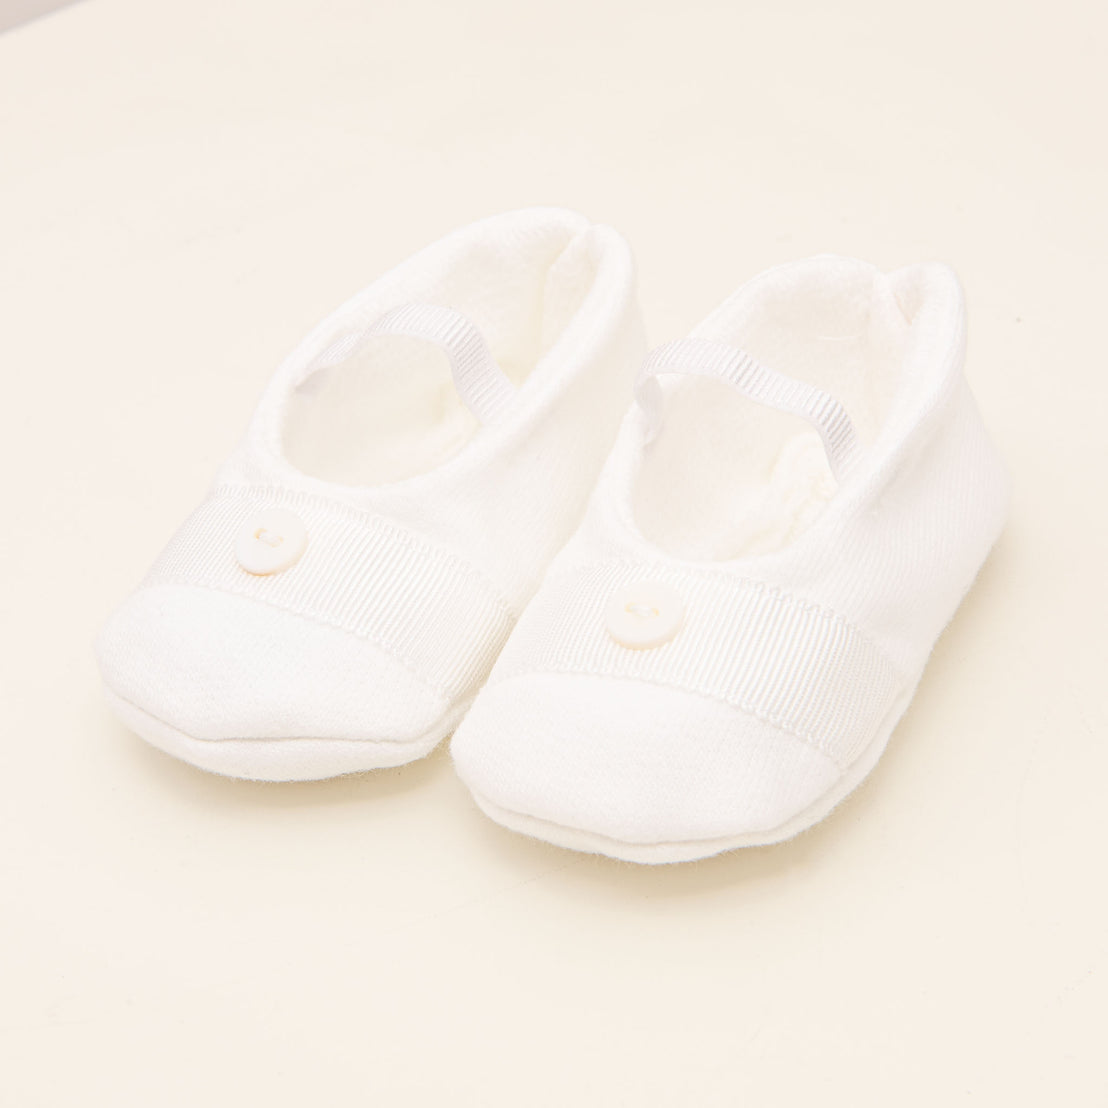 Flat lay photo of the Asher Booties made in a 100% White french terry cotton with a soft elastic strap and featuring a white grosgrain ribbon with a button detail on the top.